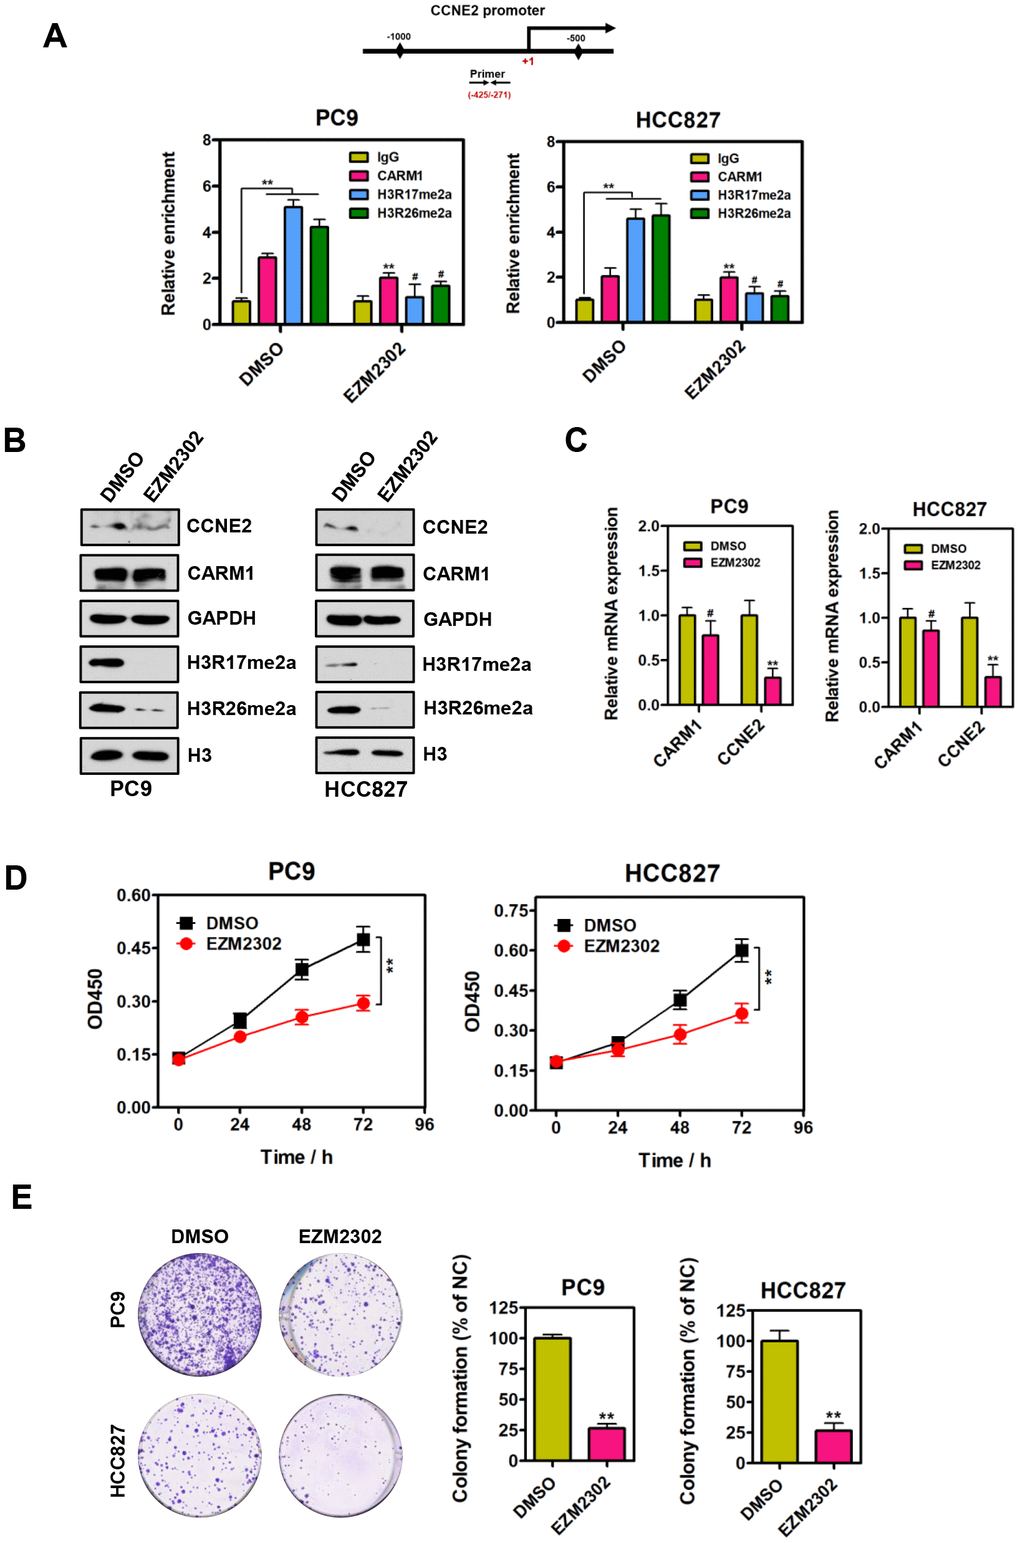 Inhibition of CARM1 enzymatic activity represses CCNE2 expression in NSCLC cells. (A) ChIP analysis of human CCNE2 promoter by antibodies against CARM1, H3R17me2a, H3R26me2a or IgG in DMSO or EZM2302-treated (10 nM) PC9 and HCC827 cells. Relative enrichment of CARM1, H3R17me2a and H3R26me2a marks on the promoter regions was analyzed by real-time PCR assays. The data were presented as means ± SDs of three independent experiments; **P #P > 0.05. (B) The protein levels of CCNE2, H3R17me2a and H3R26me2a were downregulated in EZM2302-treated (10 nM) PC9 and HCC827 cells by Western blot. GAPDH or histone H3 were used as loading controls. (C) The mRNA levels of CCNE2 was downregulated in EZM2302-treated (10 nM) PC9 and HCC827 cells by Real-time PCR assays. β-actin was used as an internal control. The data were shown as means ± SDs of three independent experiments; **P D) Cell proliferation abilities of DMSO or EZM2302-treated (10 nM) PC9 and HCC827 cells were assessed by CCK-8 assays. The data were presented as means ± SDs of three independent experiments; **P E) Colony-formative abilities of DMSO or EZM2302-treated (10 nM) PC9 and HCC827 cells were determined by colony-formation assays. Right panel, the relative colony-formative abilities (% of NC) were quantified. The data were shown as means ± SDs of three independent experiments; **P 